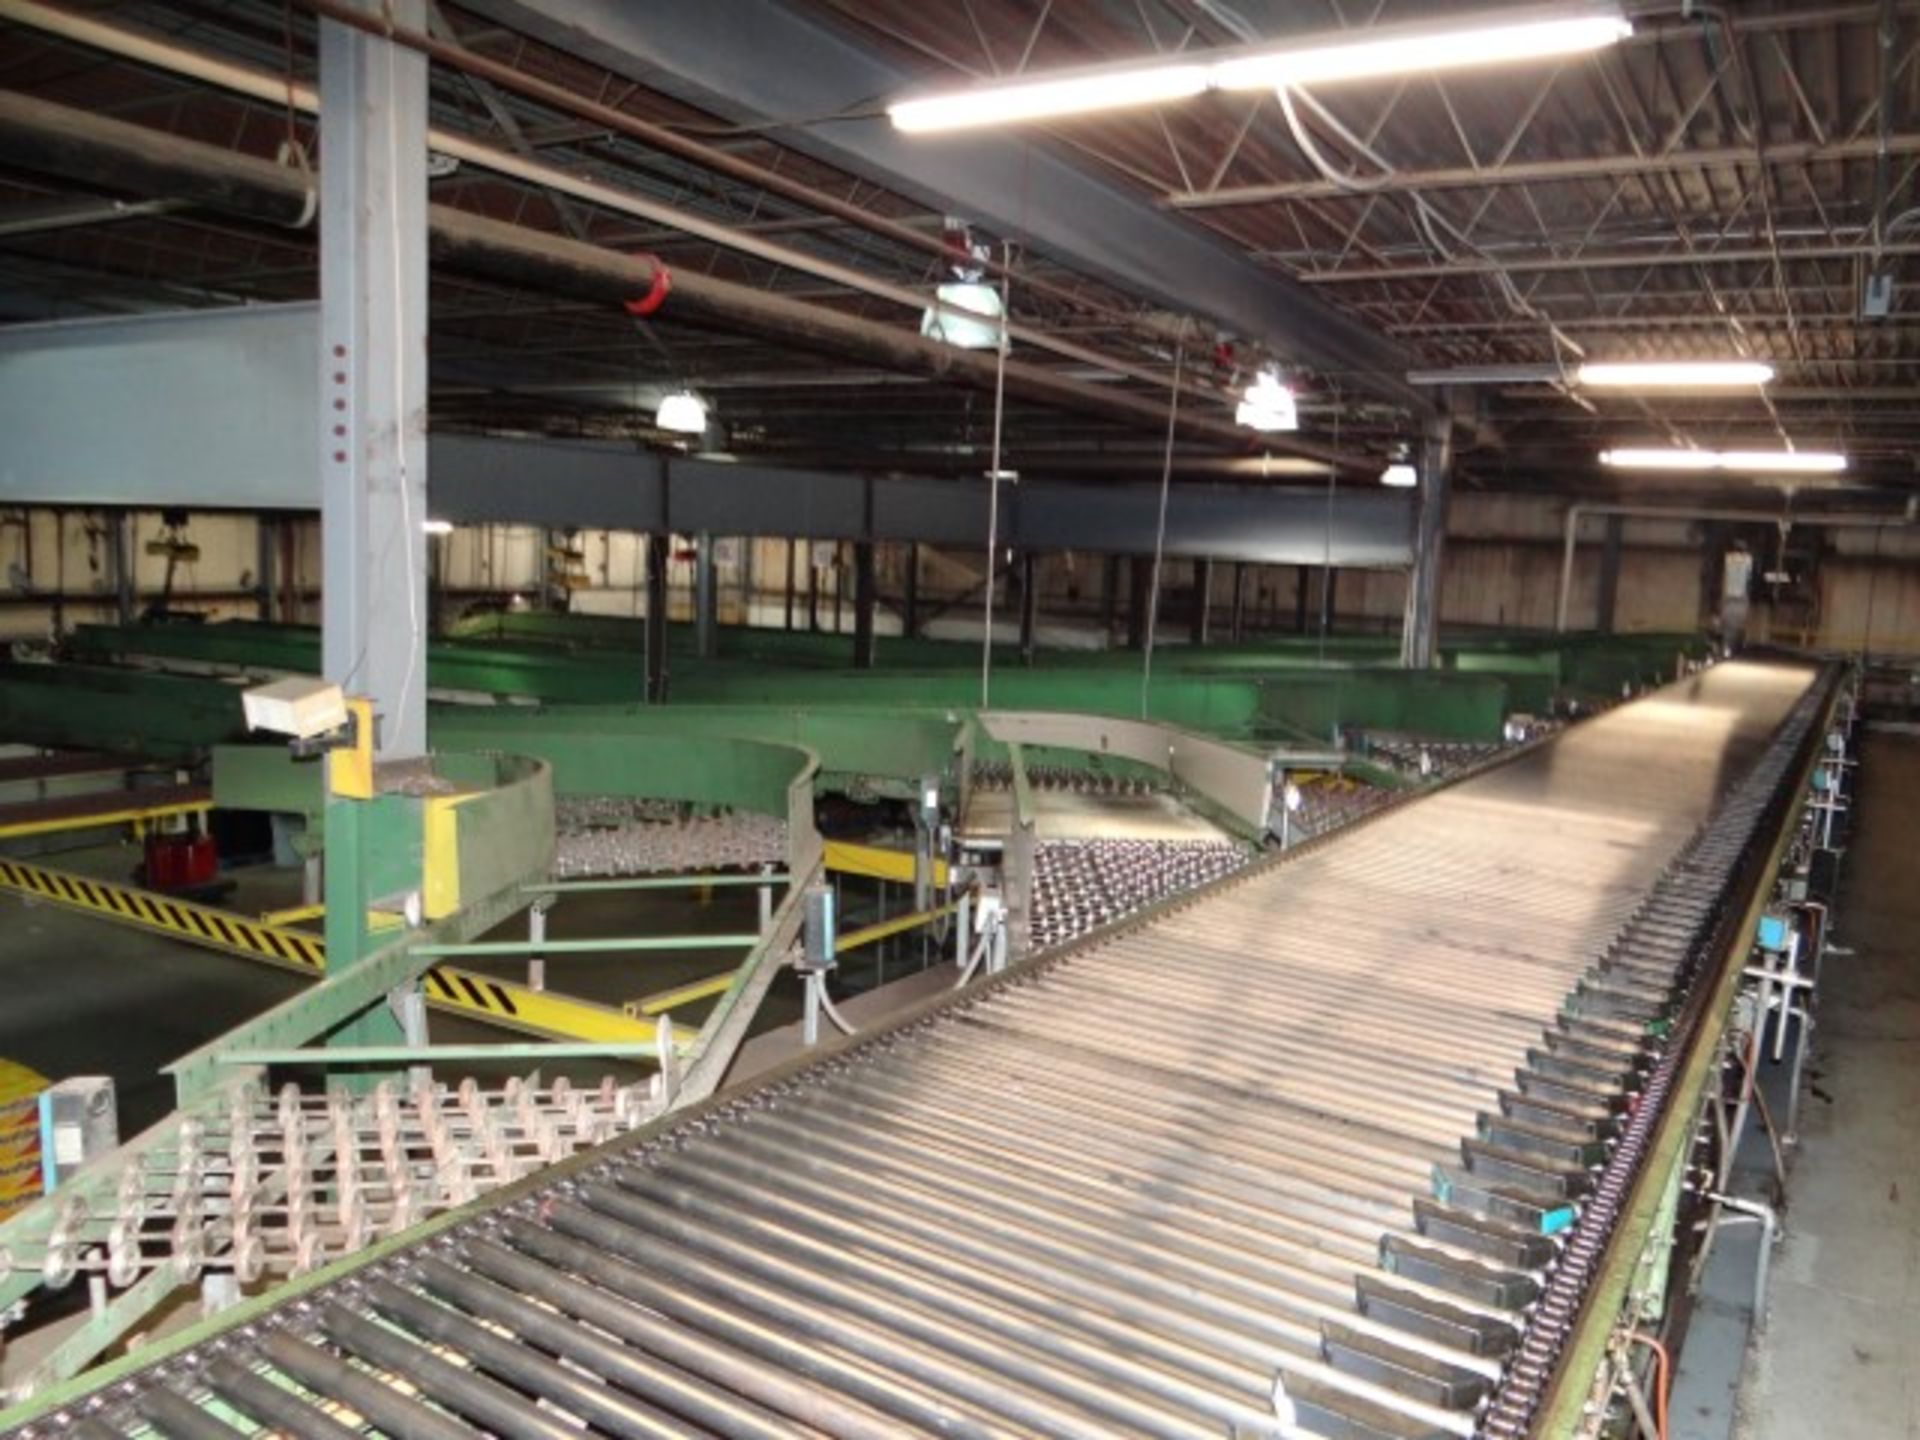 Sortation Line Conveyor, Two Controls, and 6 Drop Down Conveyors - Image 9 of 22